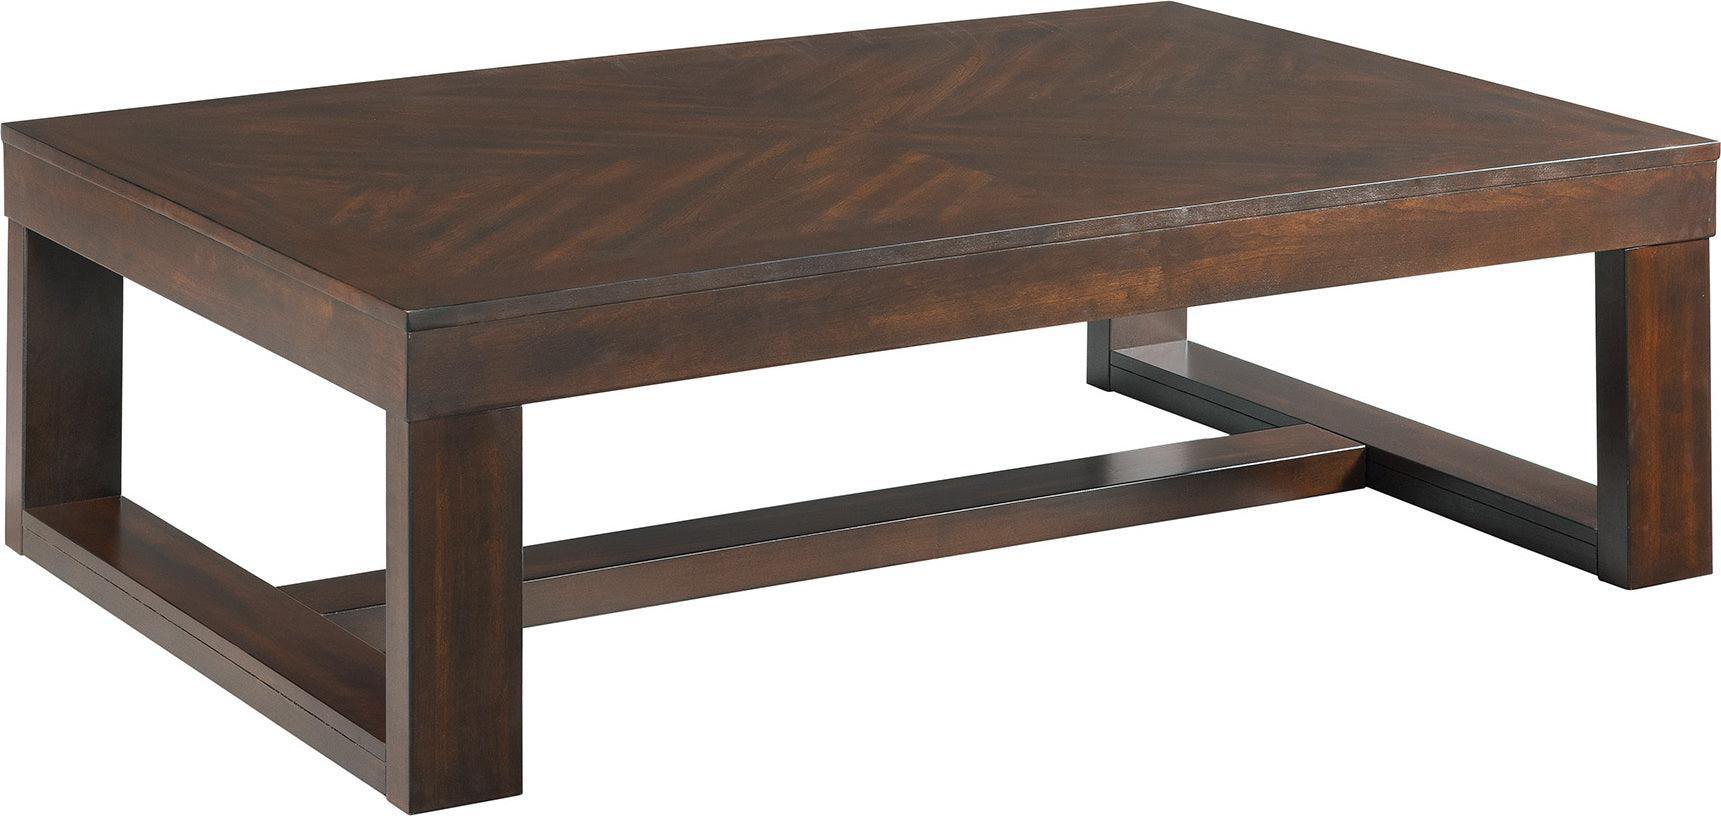 Elements Coffee Tables - Drew Rectangle Coffee Table Cherry